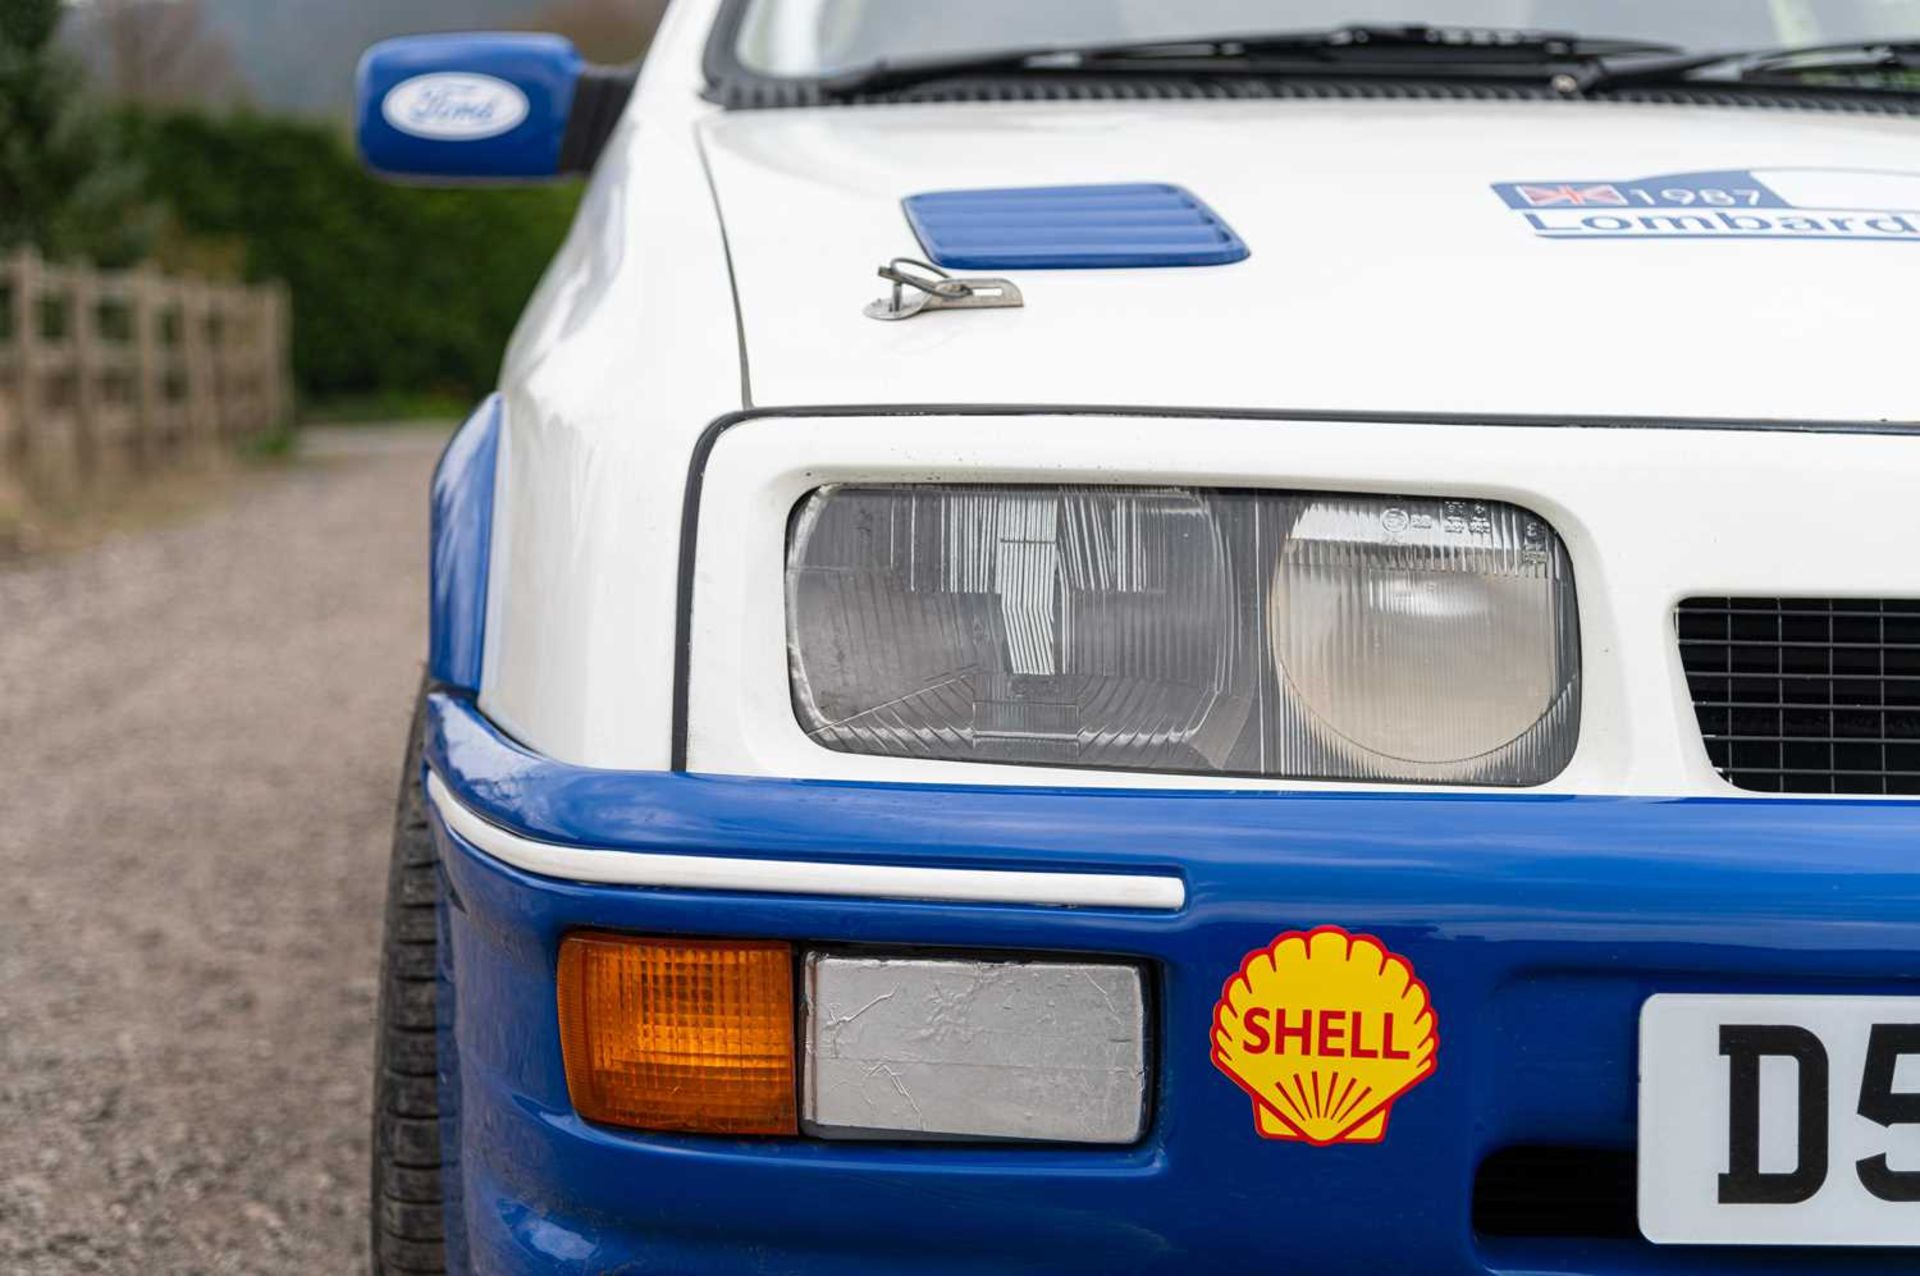 1986 Ford Sierra RS Cosworth - Image 37 of 73